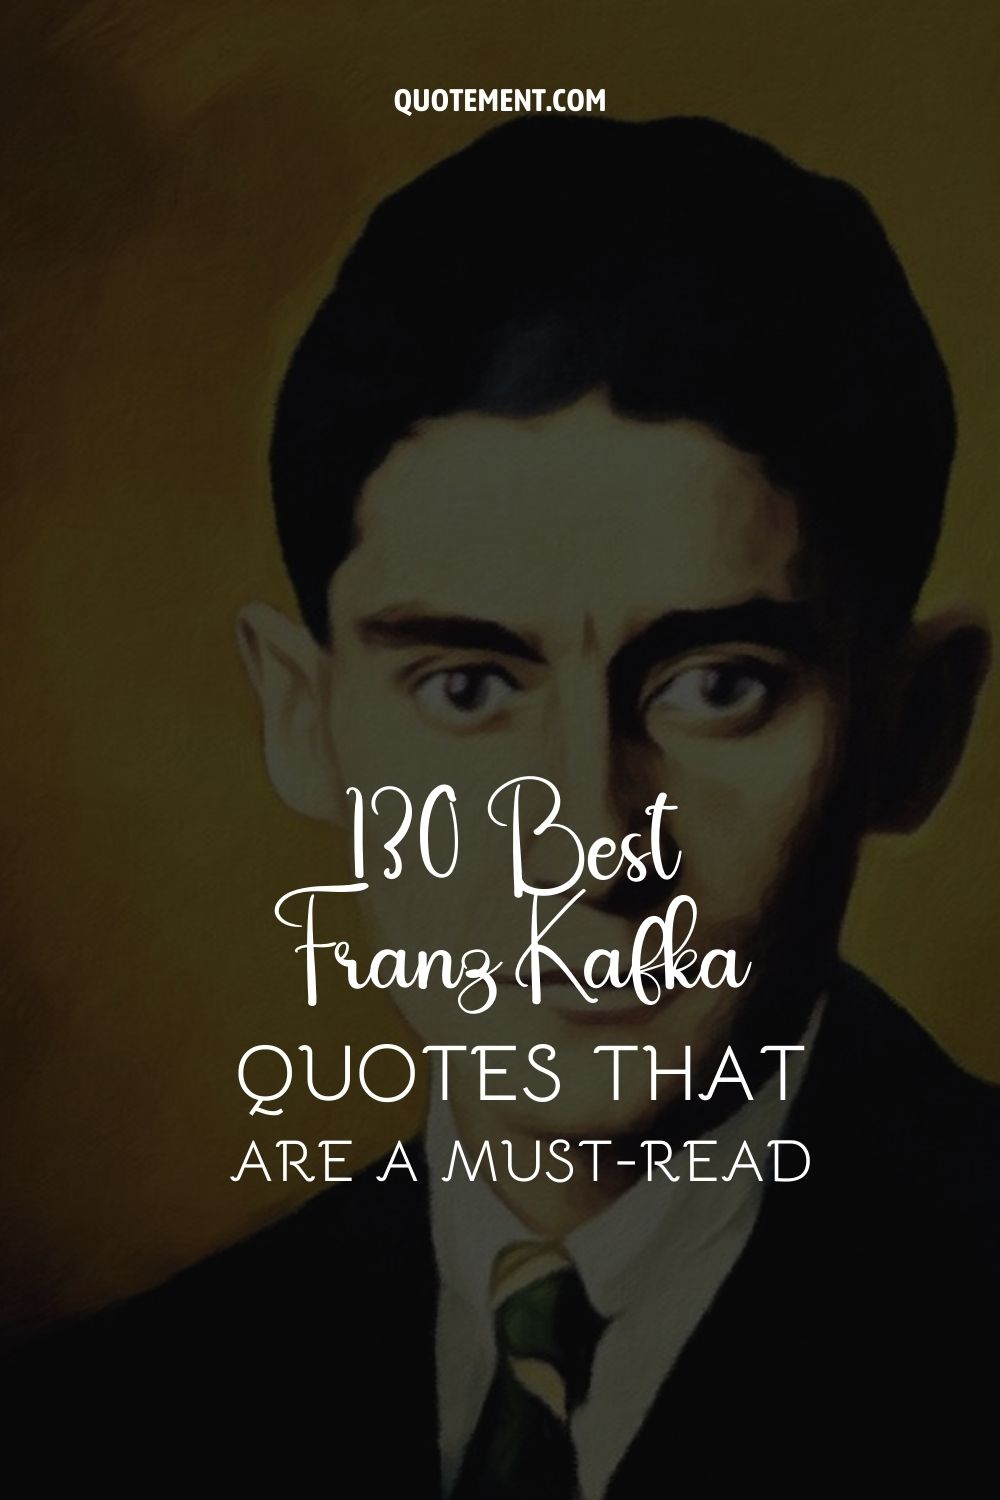 130 Best Franz Kafka Quotes That Are A Must-Read 